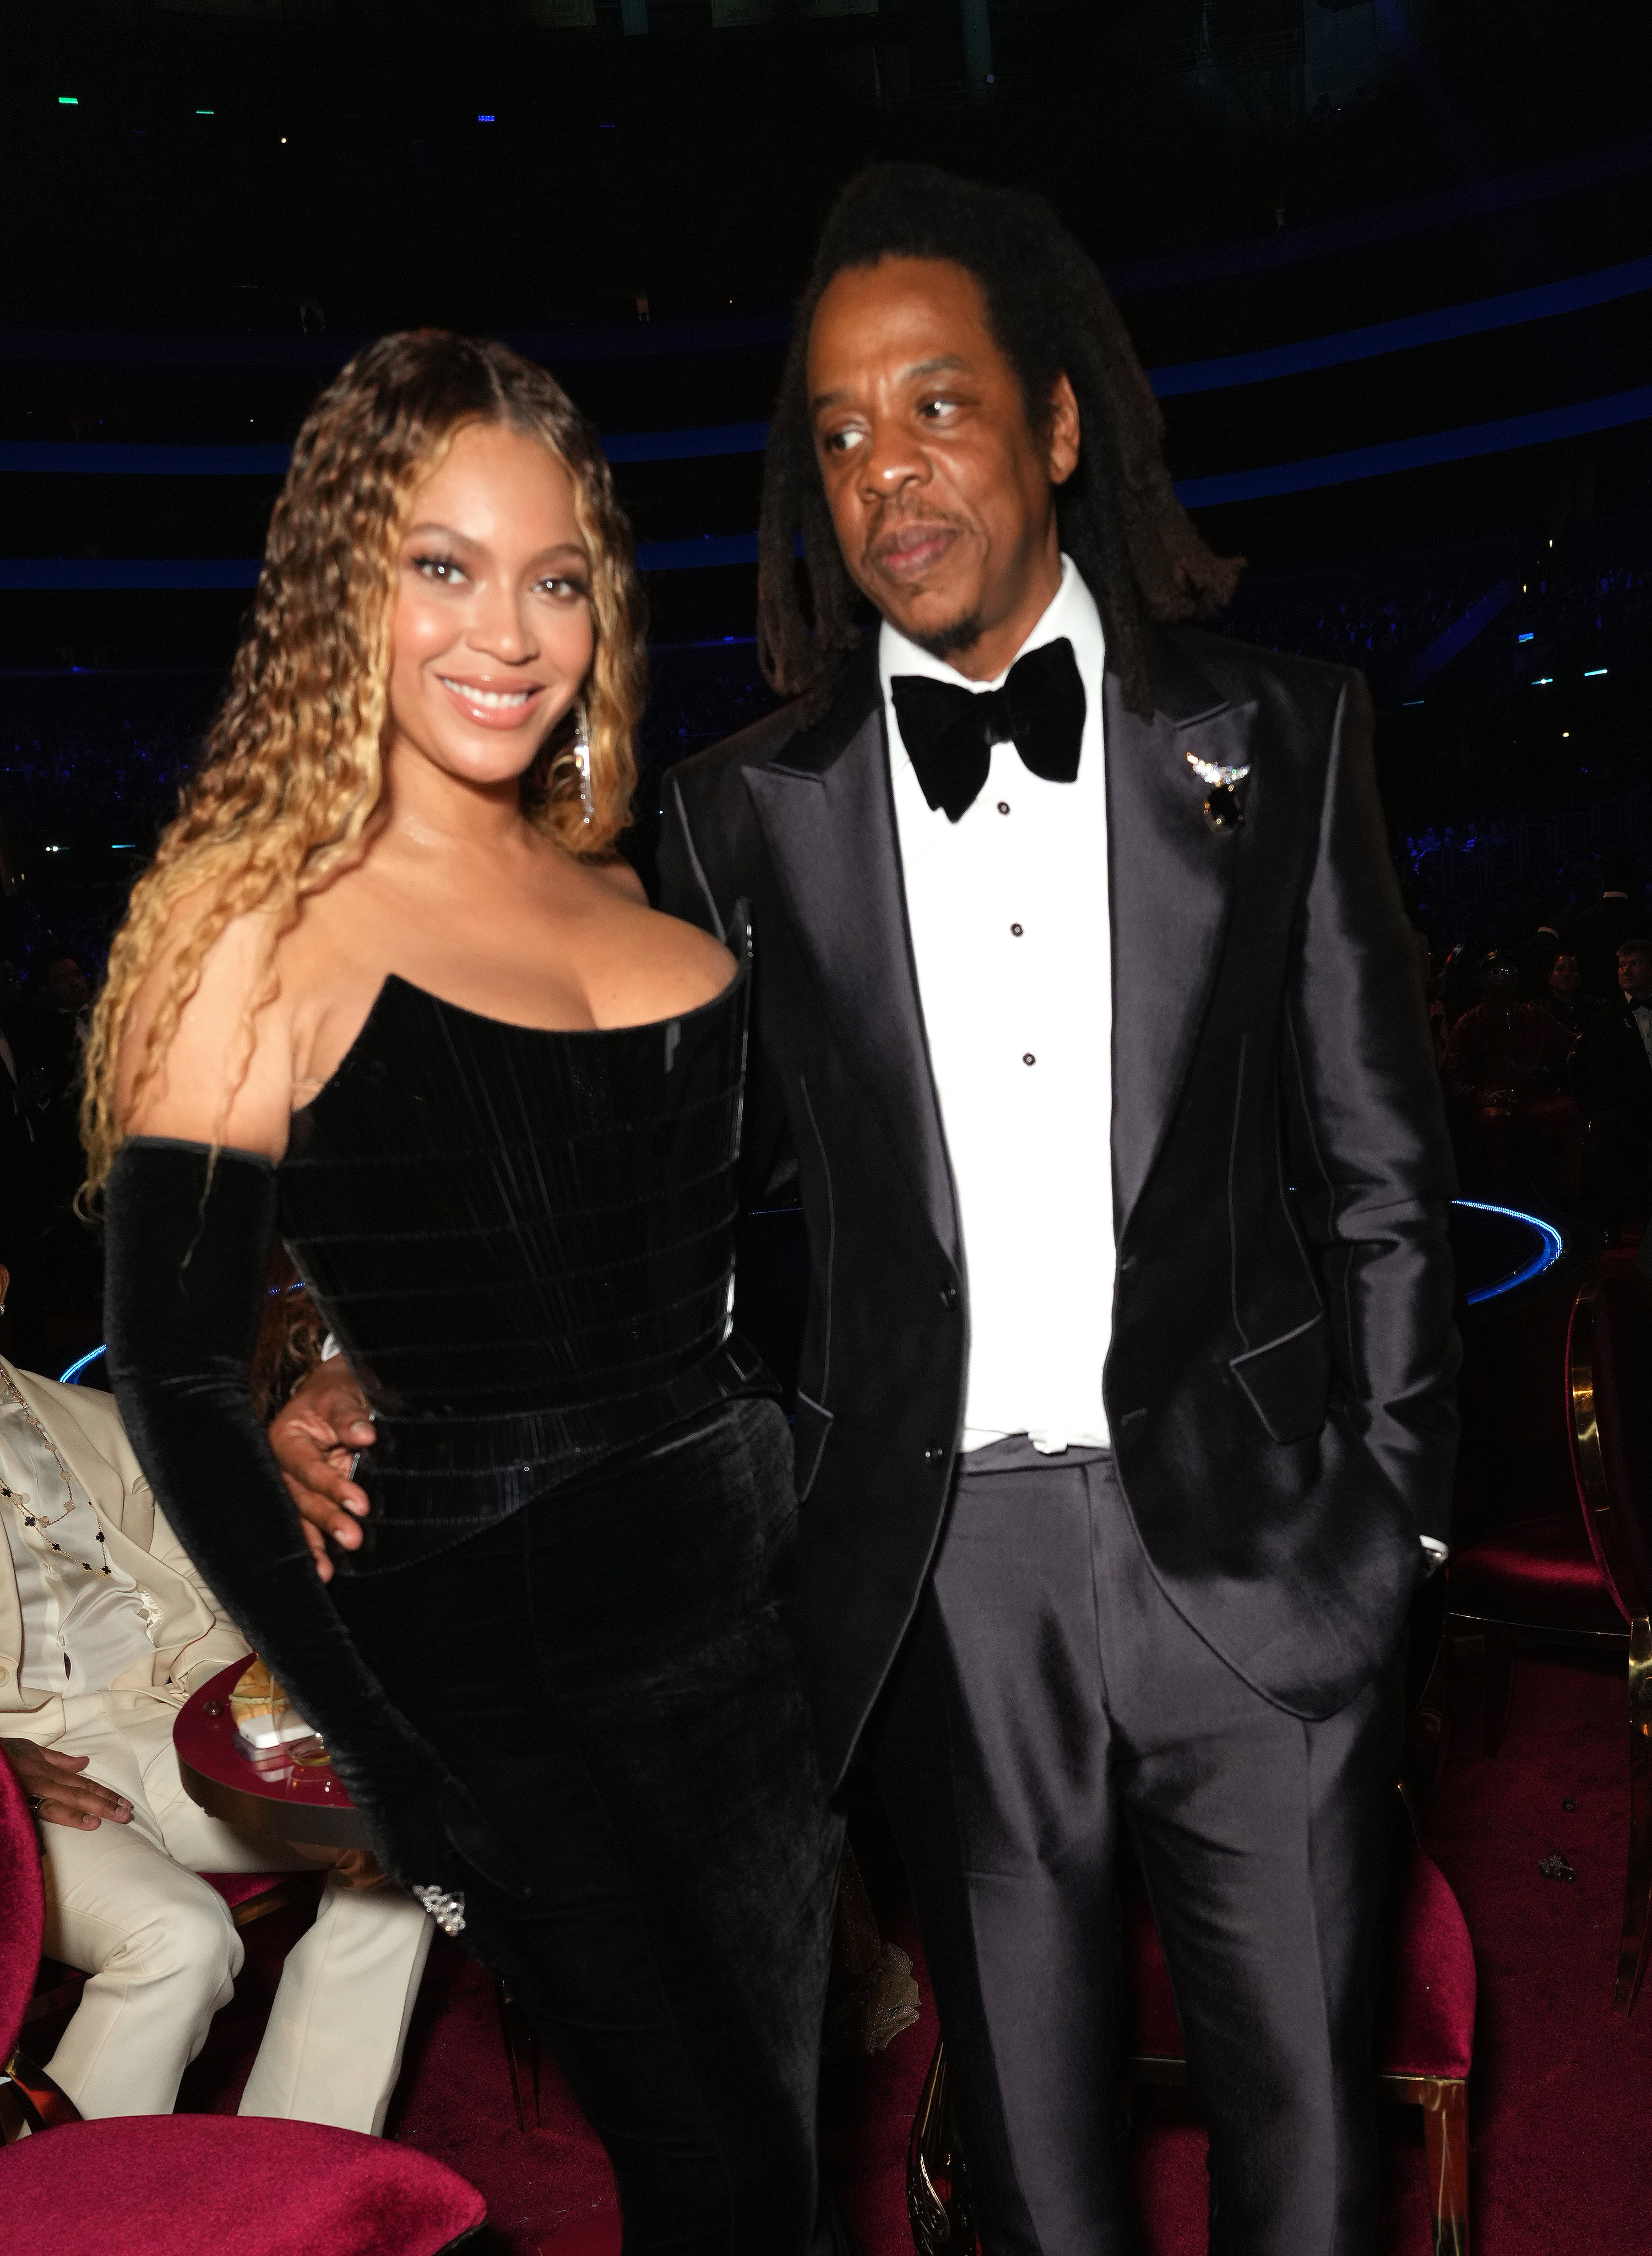 Jay-z looking at Beyonce while at an event